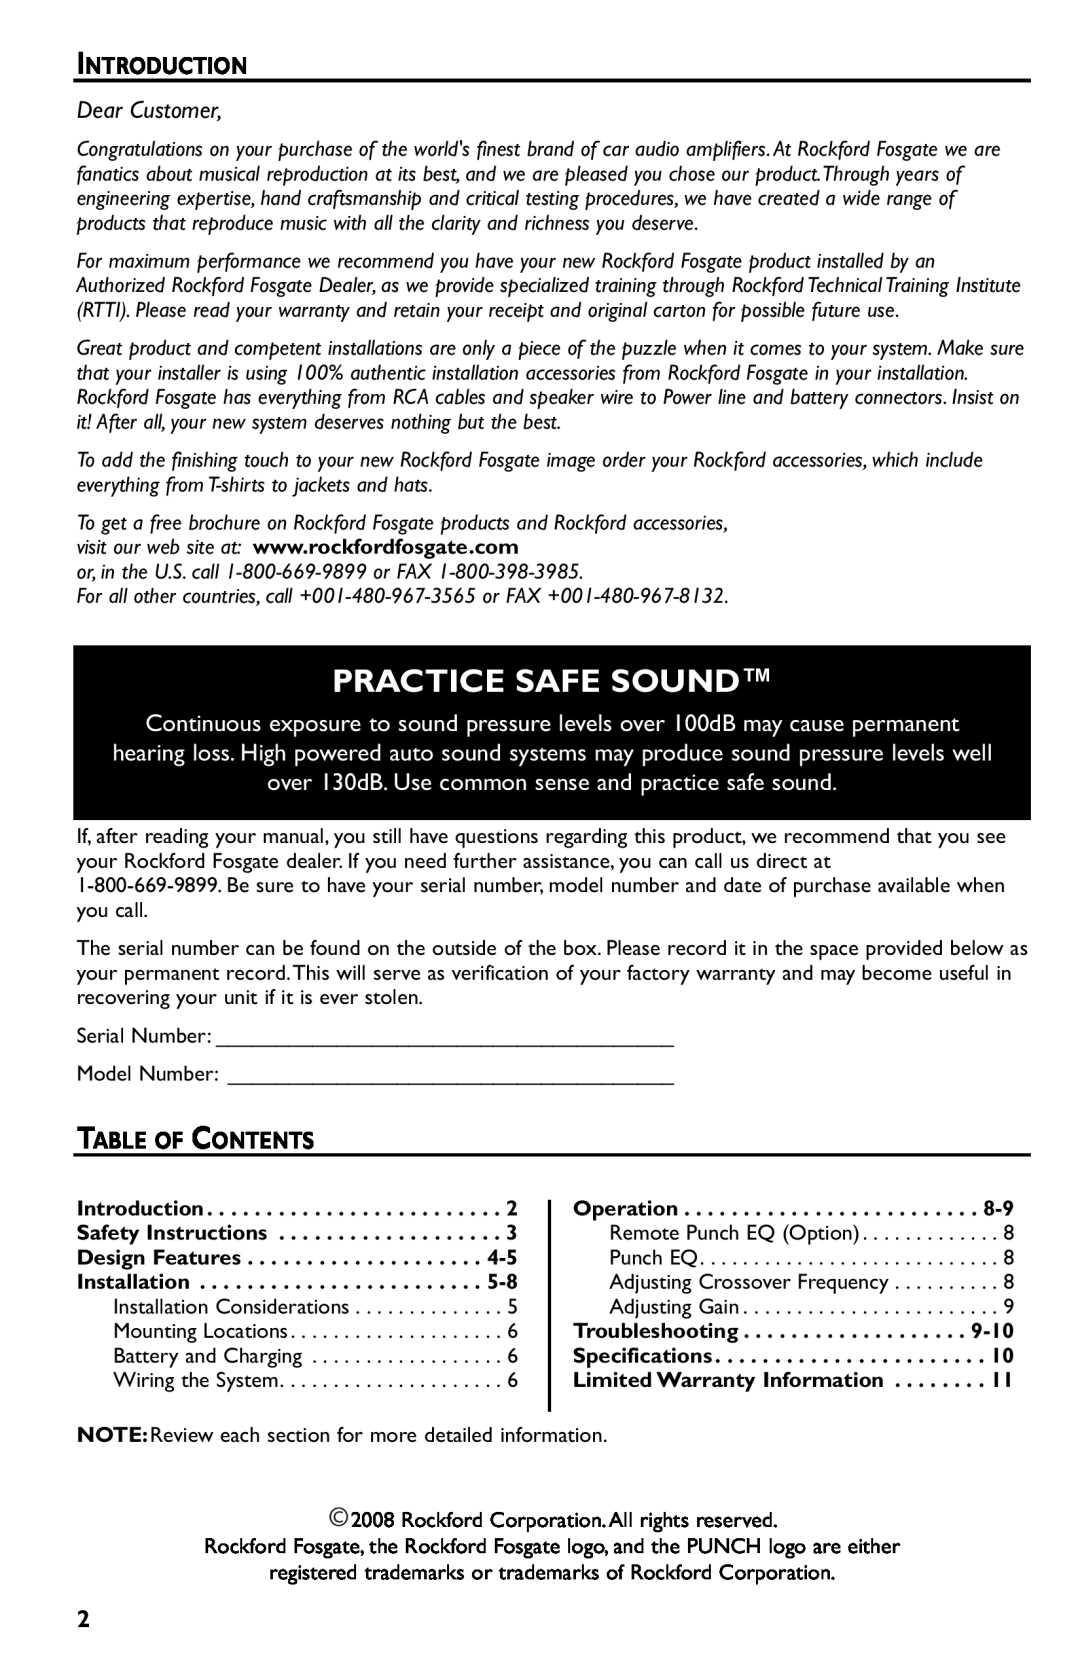 Rockford Fosgate p3002 manual Practice Safe Sound, Introduction, Table Of Contents 